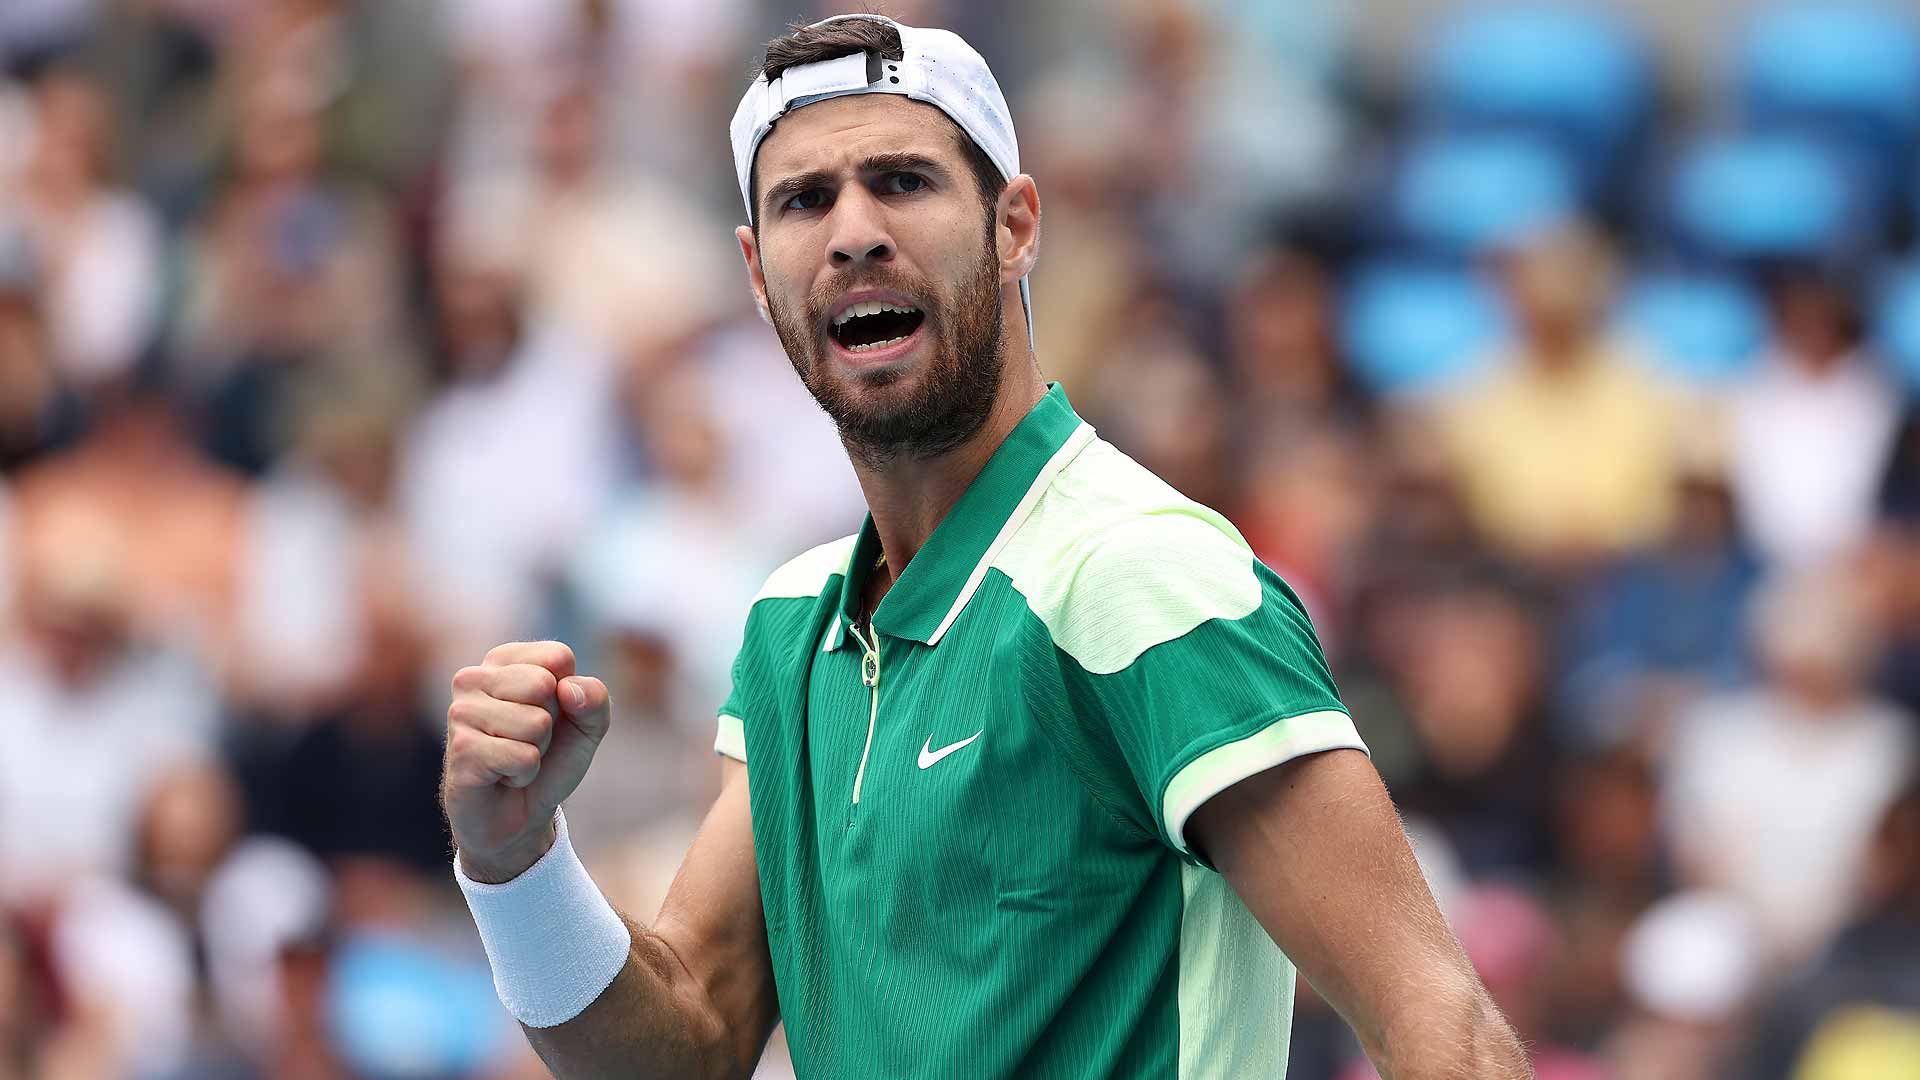 Karen Khachanov has climbed as high as No. 8 in the Pepperstone ATP Rankings.